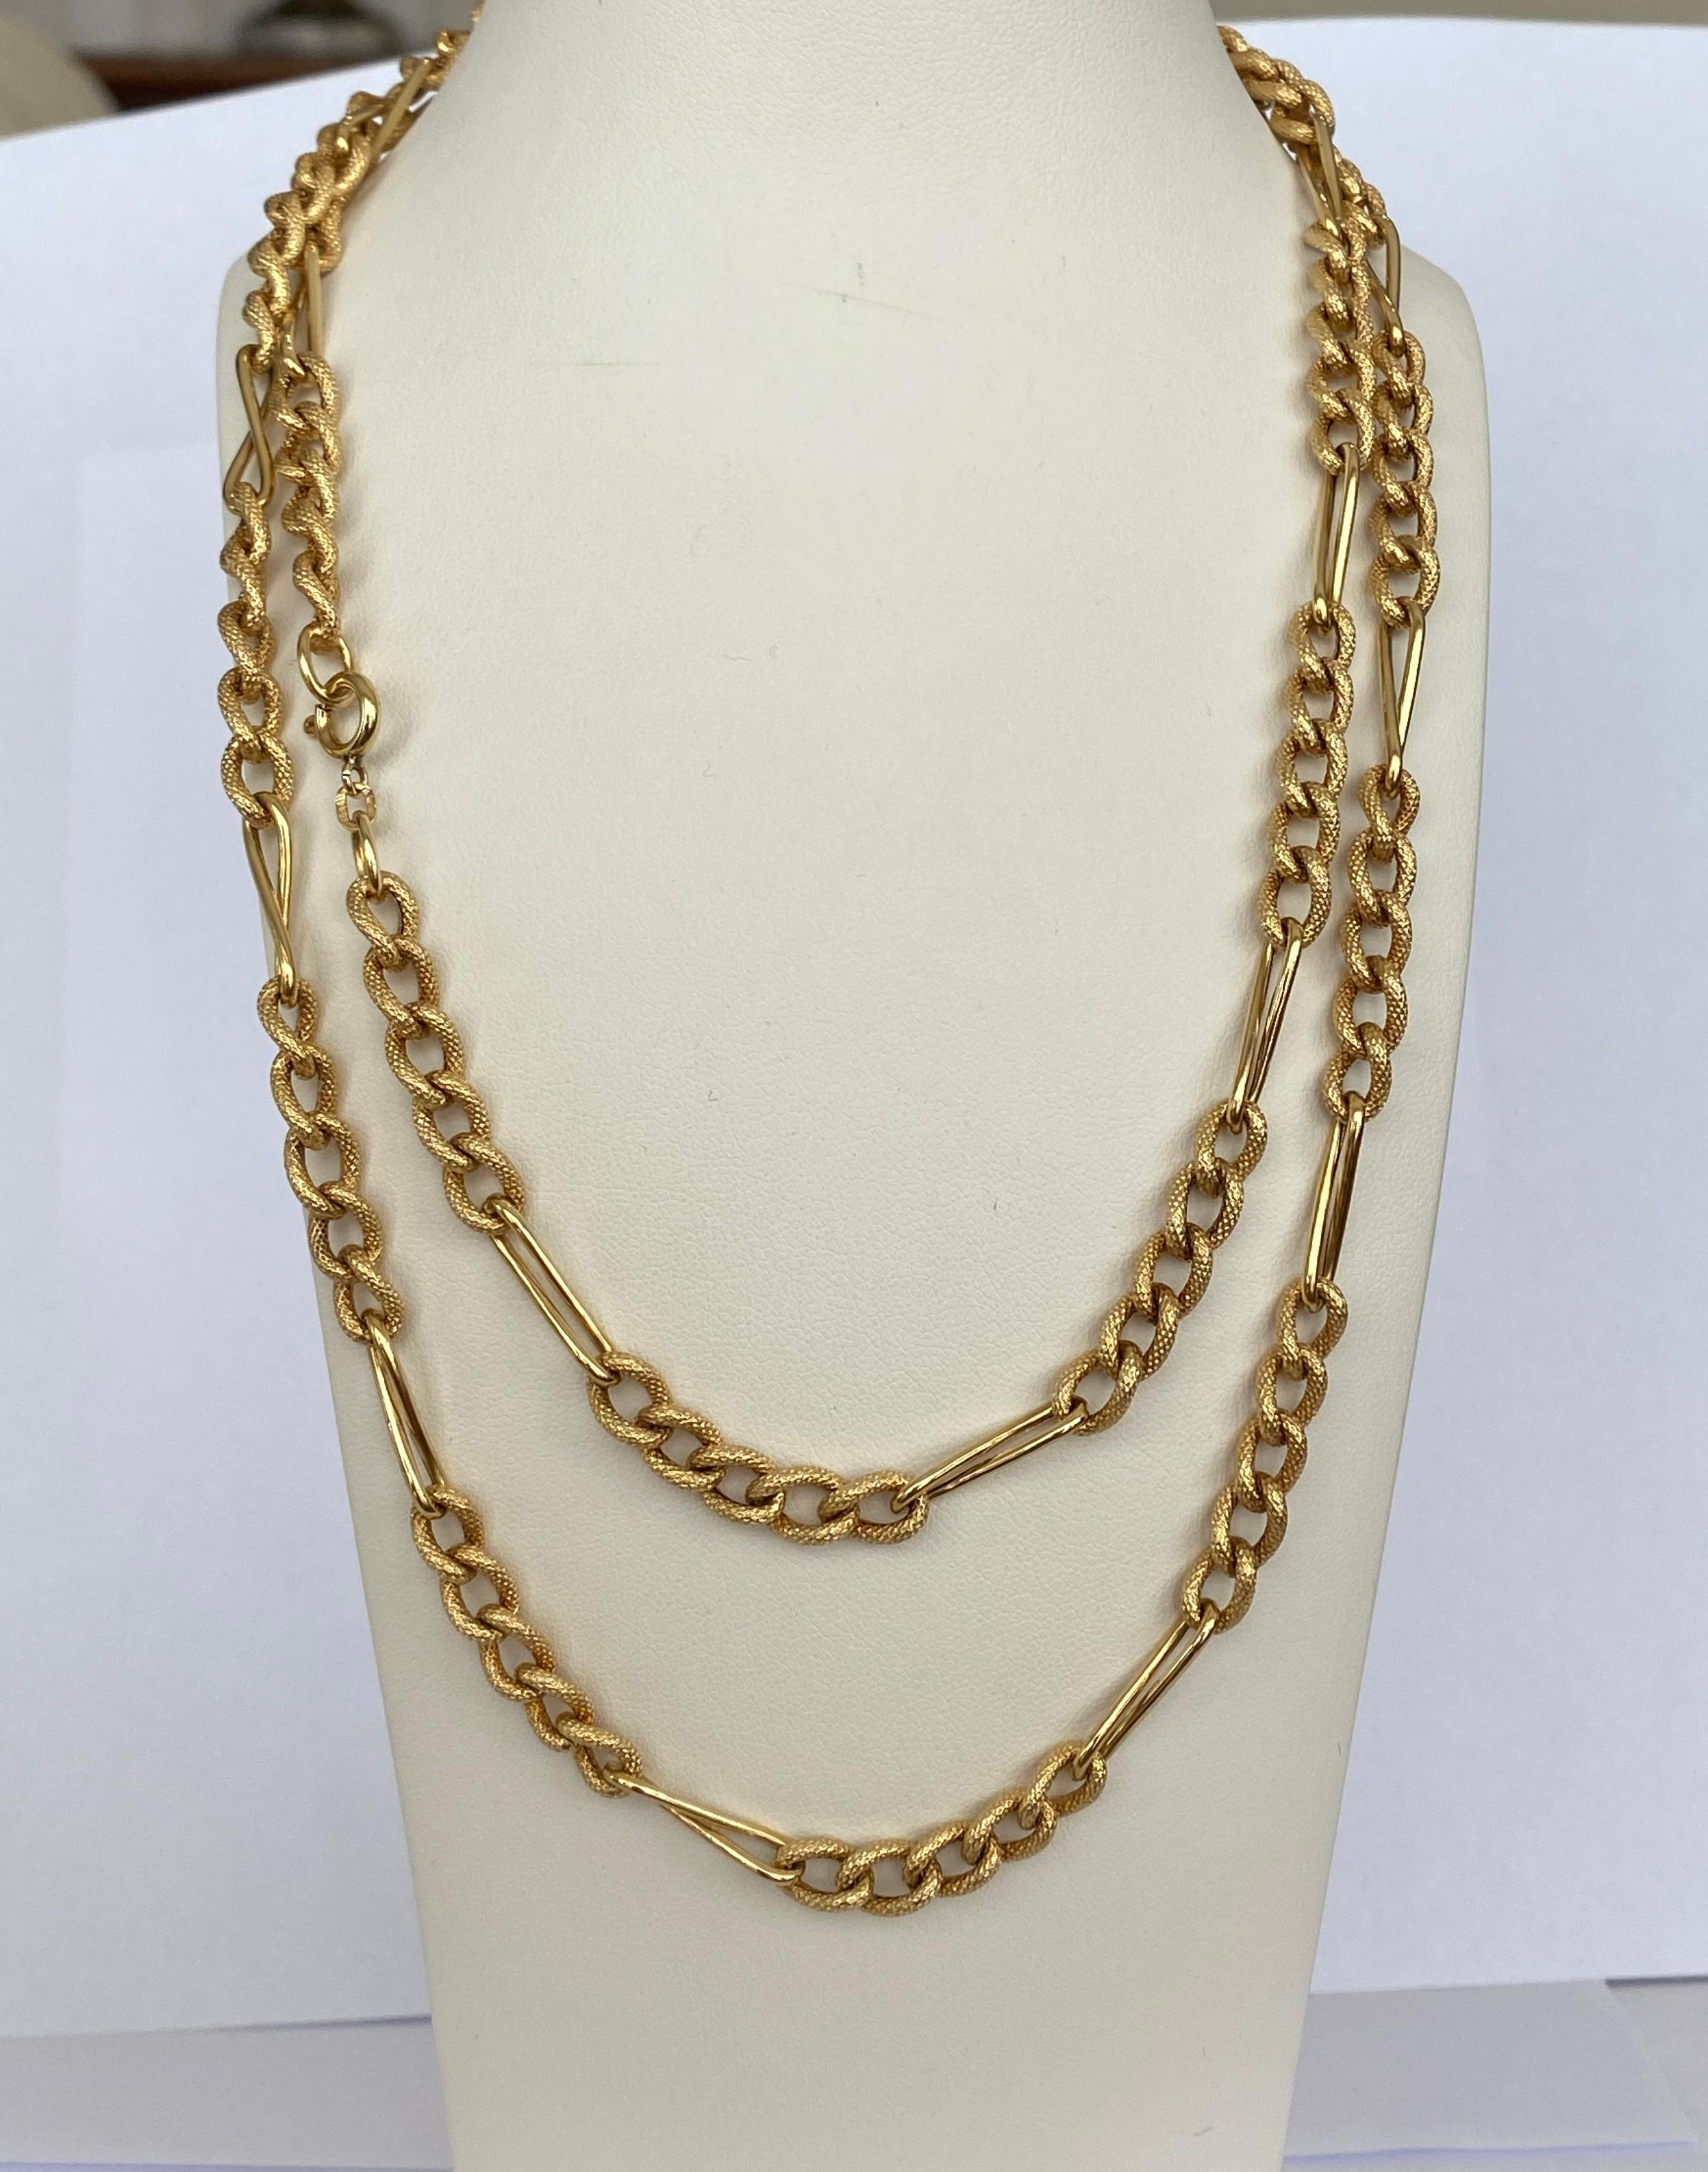 Offered in excellent condition is a beautiful 18 KT yellow gold design necklace. The necklace can be worn in two rows.
Necklace is hallmarked 750 and numbered.
Weight: 32.1 grams
Length of the necklace is 94 cm.
Width of the necklace is 7 mm
